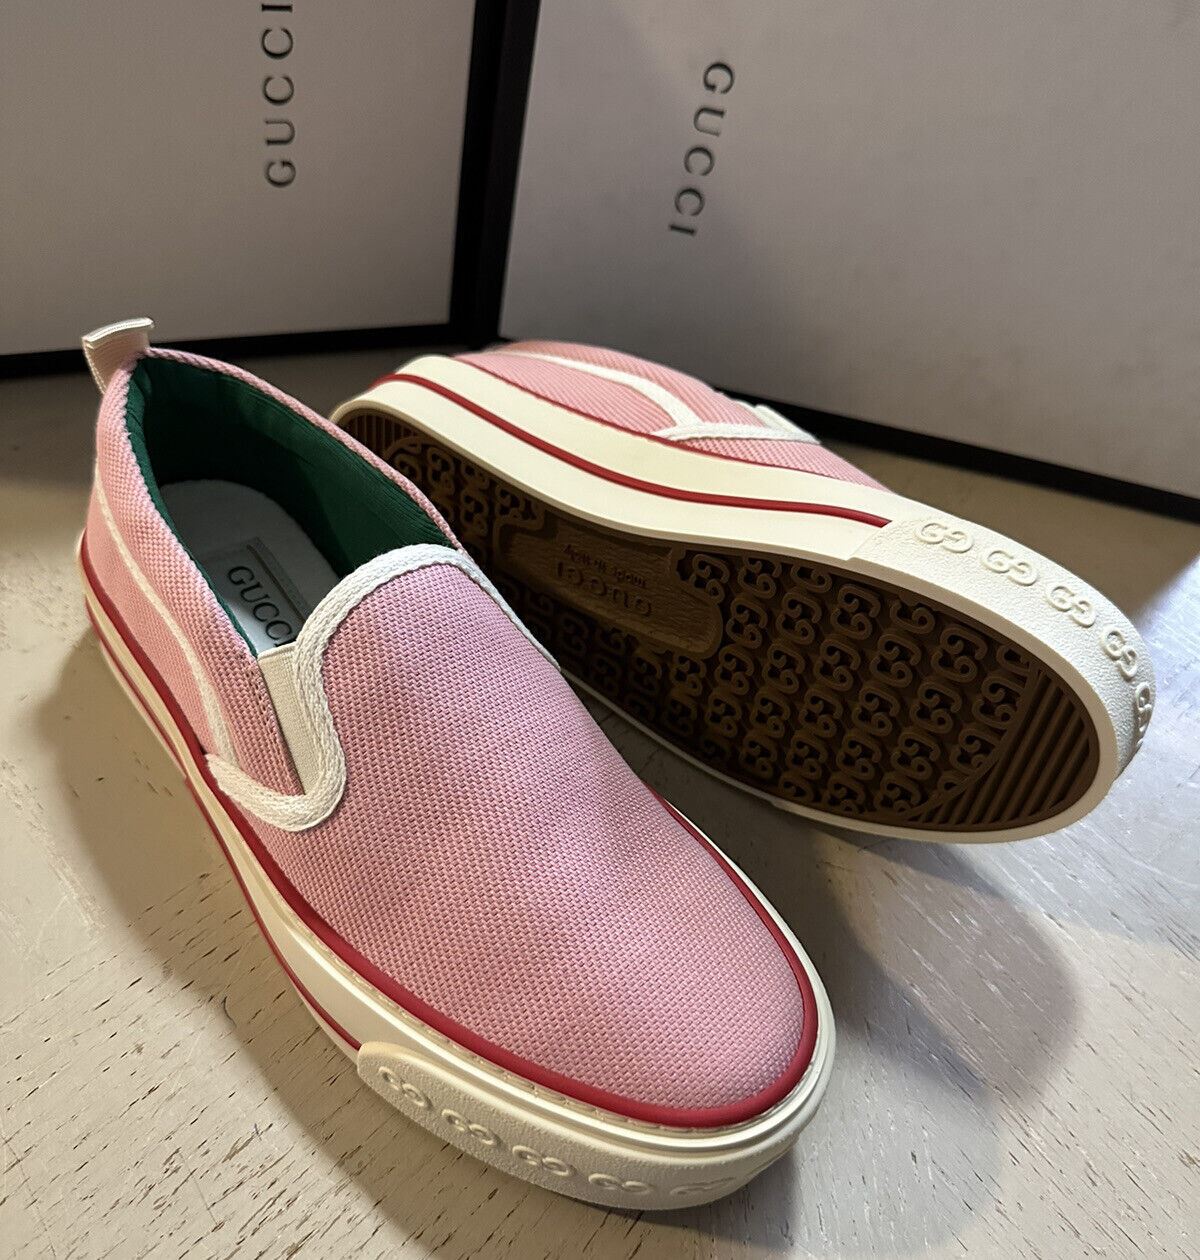 New Gucci Women’s Old Tennis Tweed Loafers Sneakers Pink 5.5 US/35.5 Eu 624733